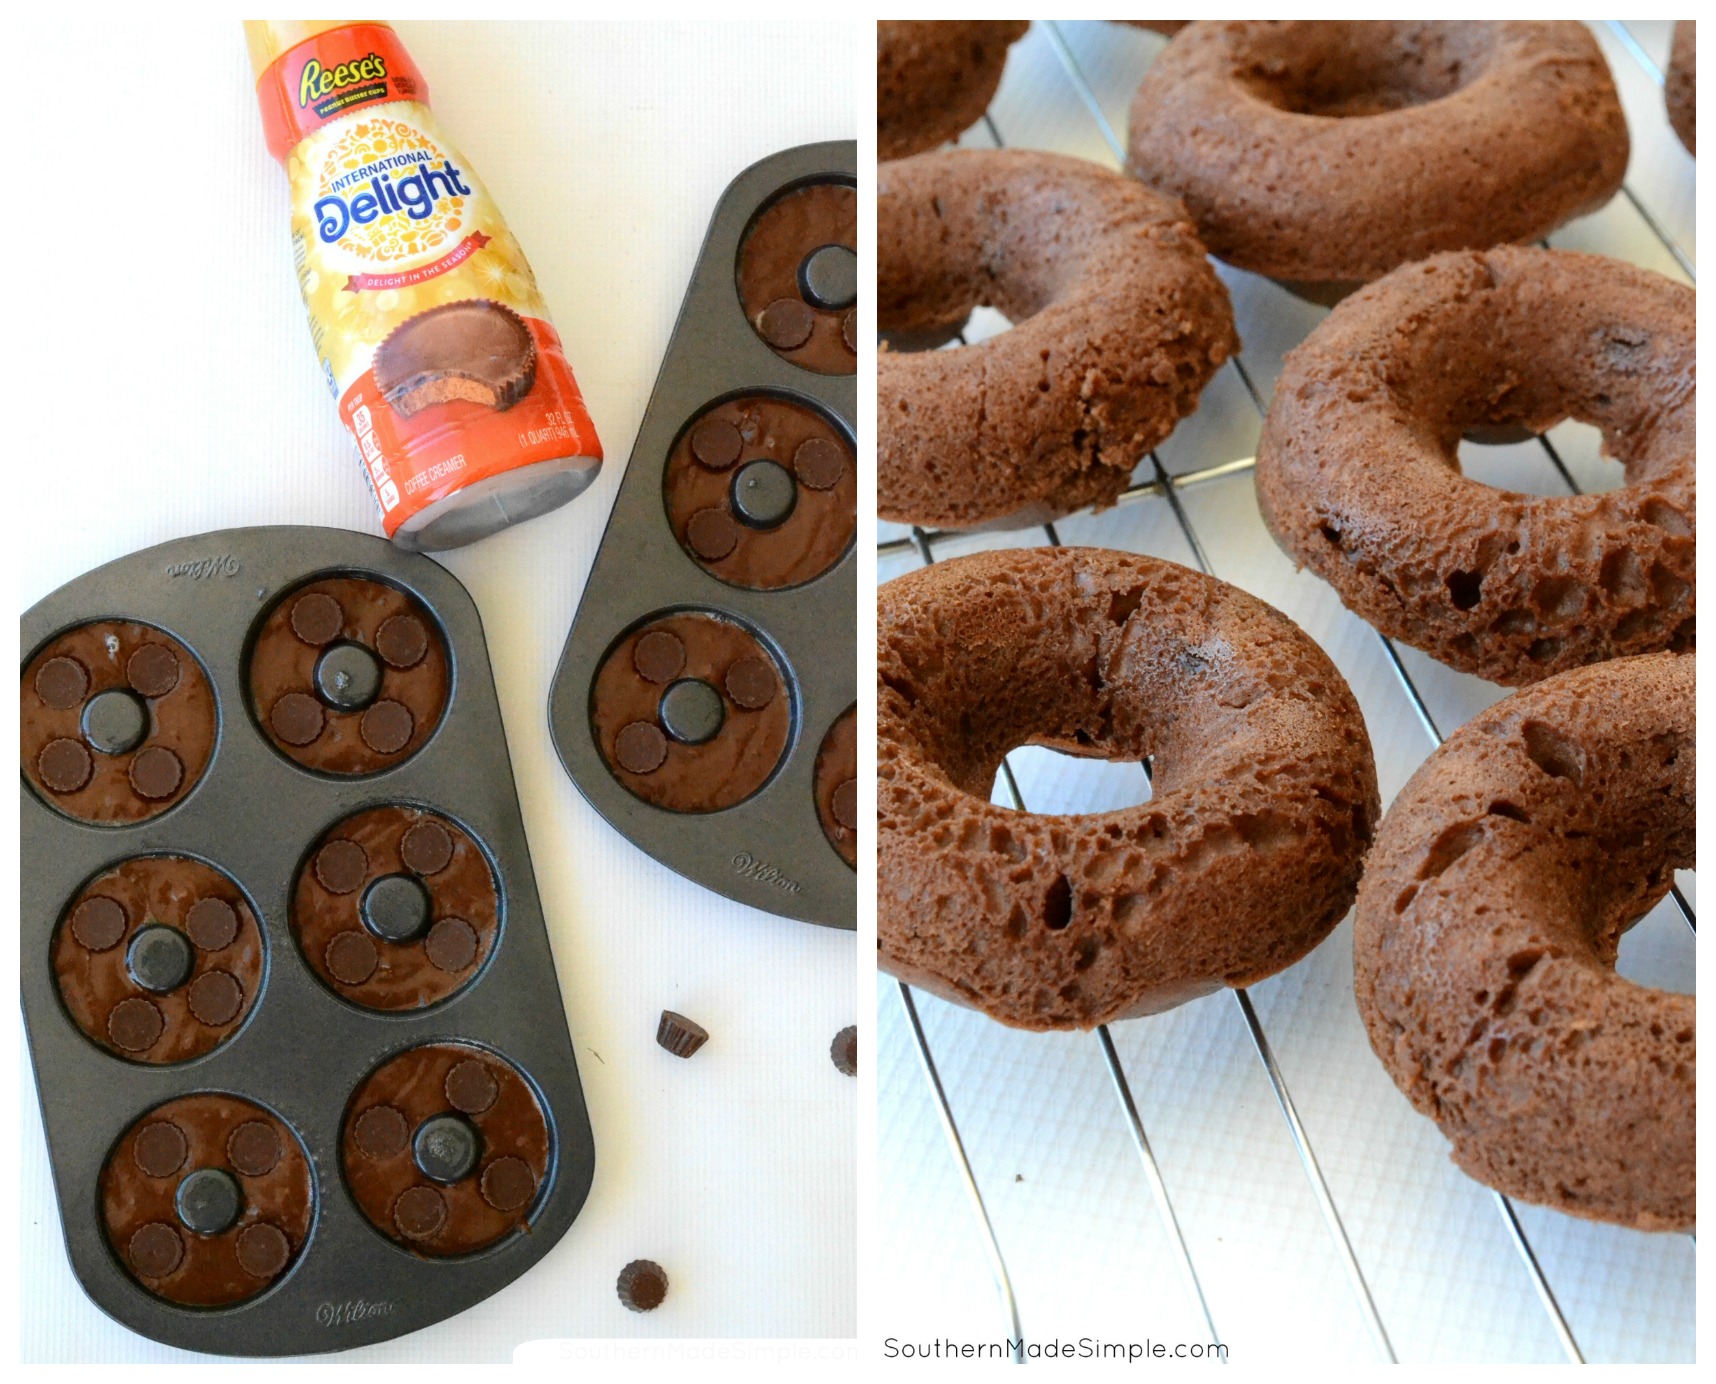 These Glazed Chocolate Peanut Butter Cup Doughnuts are a decadent treat that are easy to make, and they're perfect paired with your morning cup of coffee! #ad #DelightfulMoments #SplashOfDelight